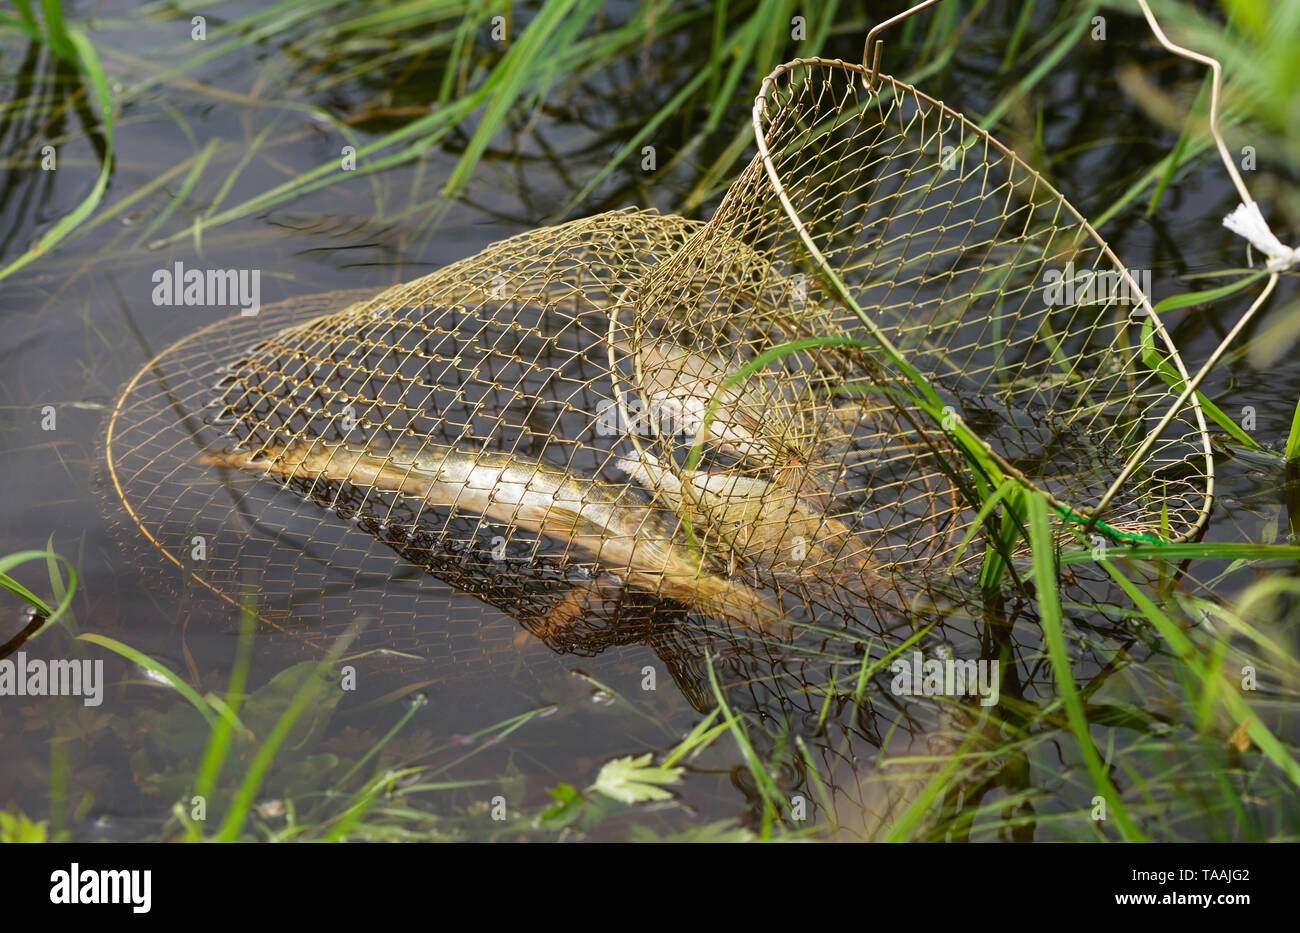 Several caught fish are in a fishing basket in water. Stock Photo